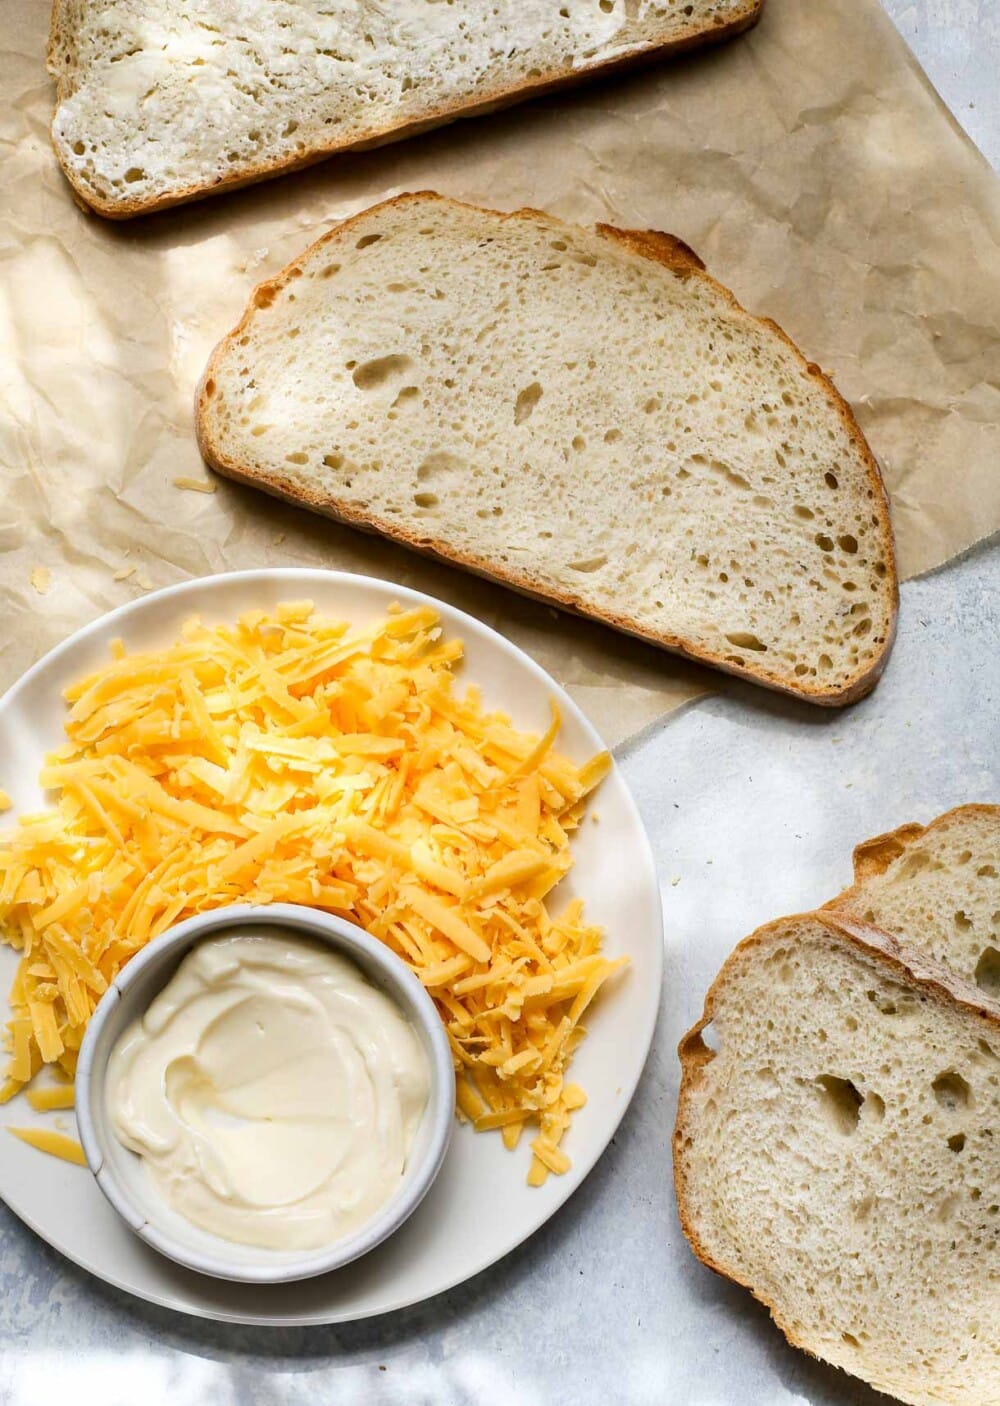 white bread on parchment with grated cheese next to it on a plate